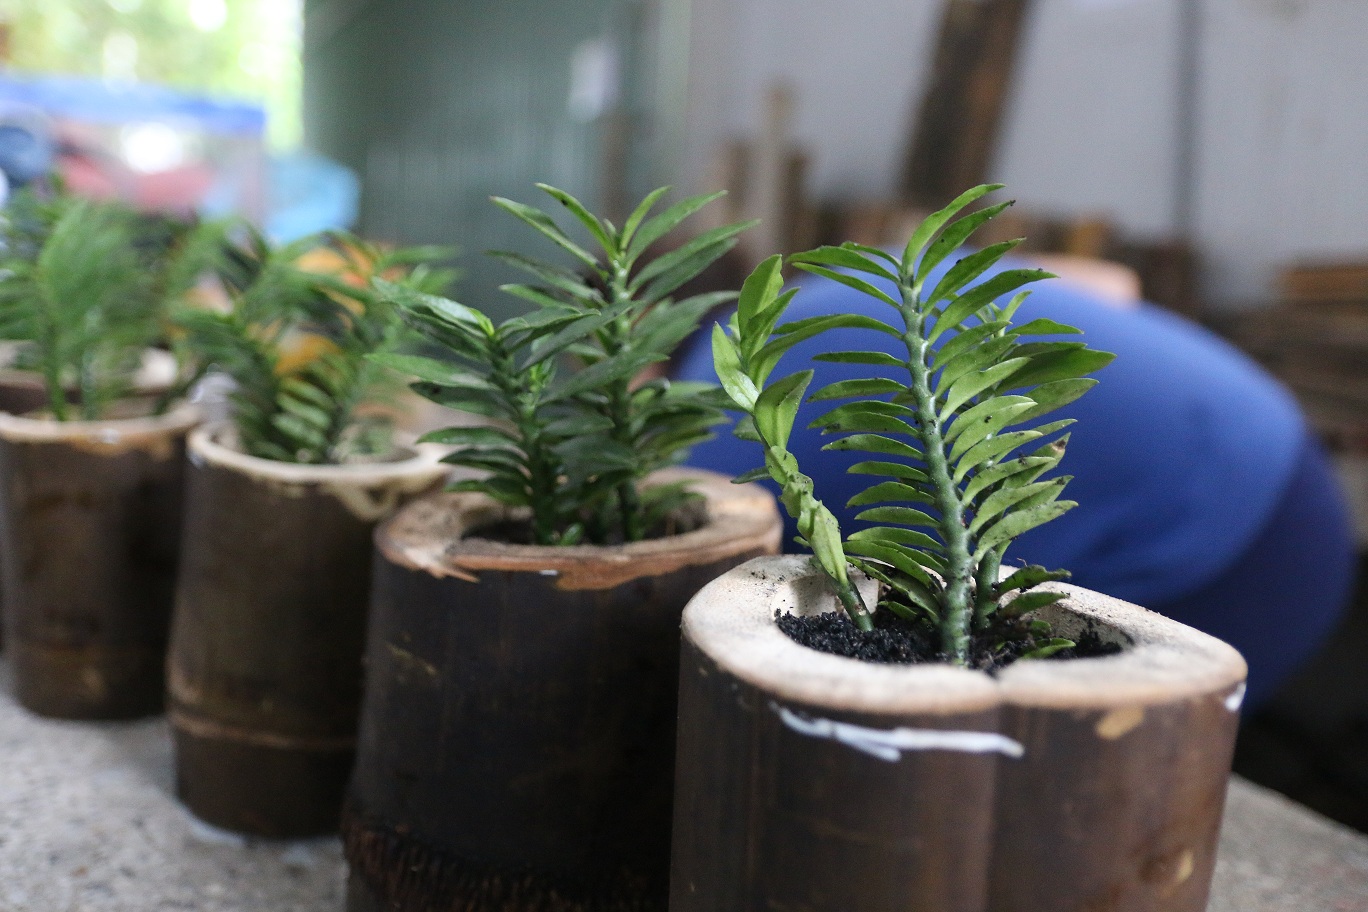 Spare bamboo is turned into vegetable pots. Photo: Tuoi Tre